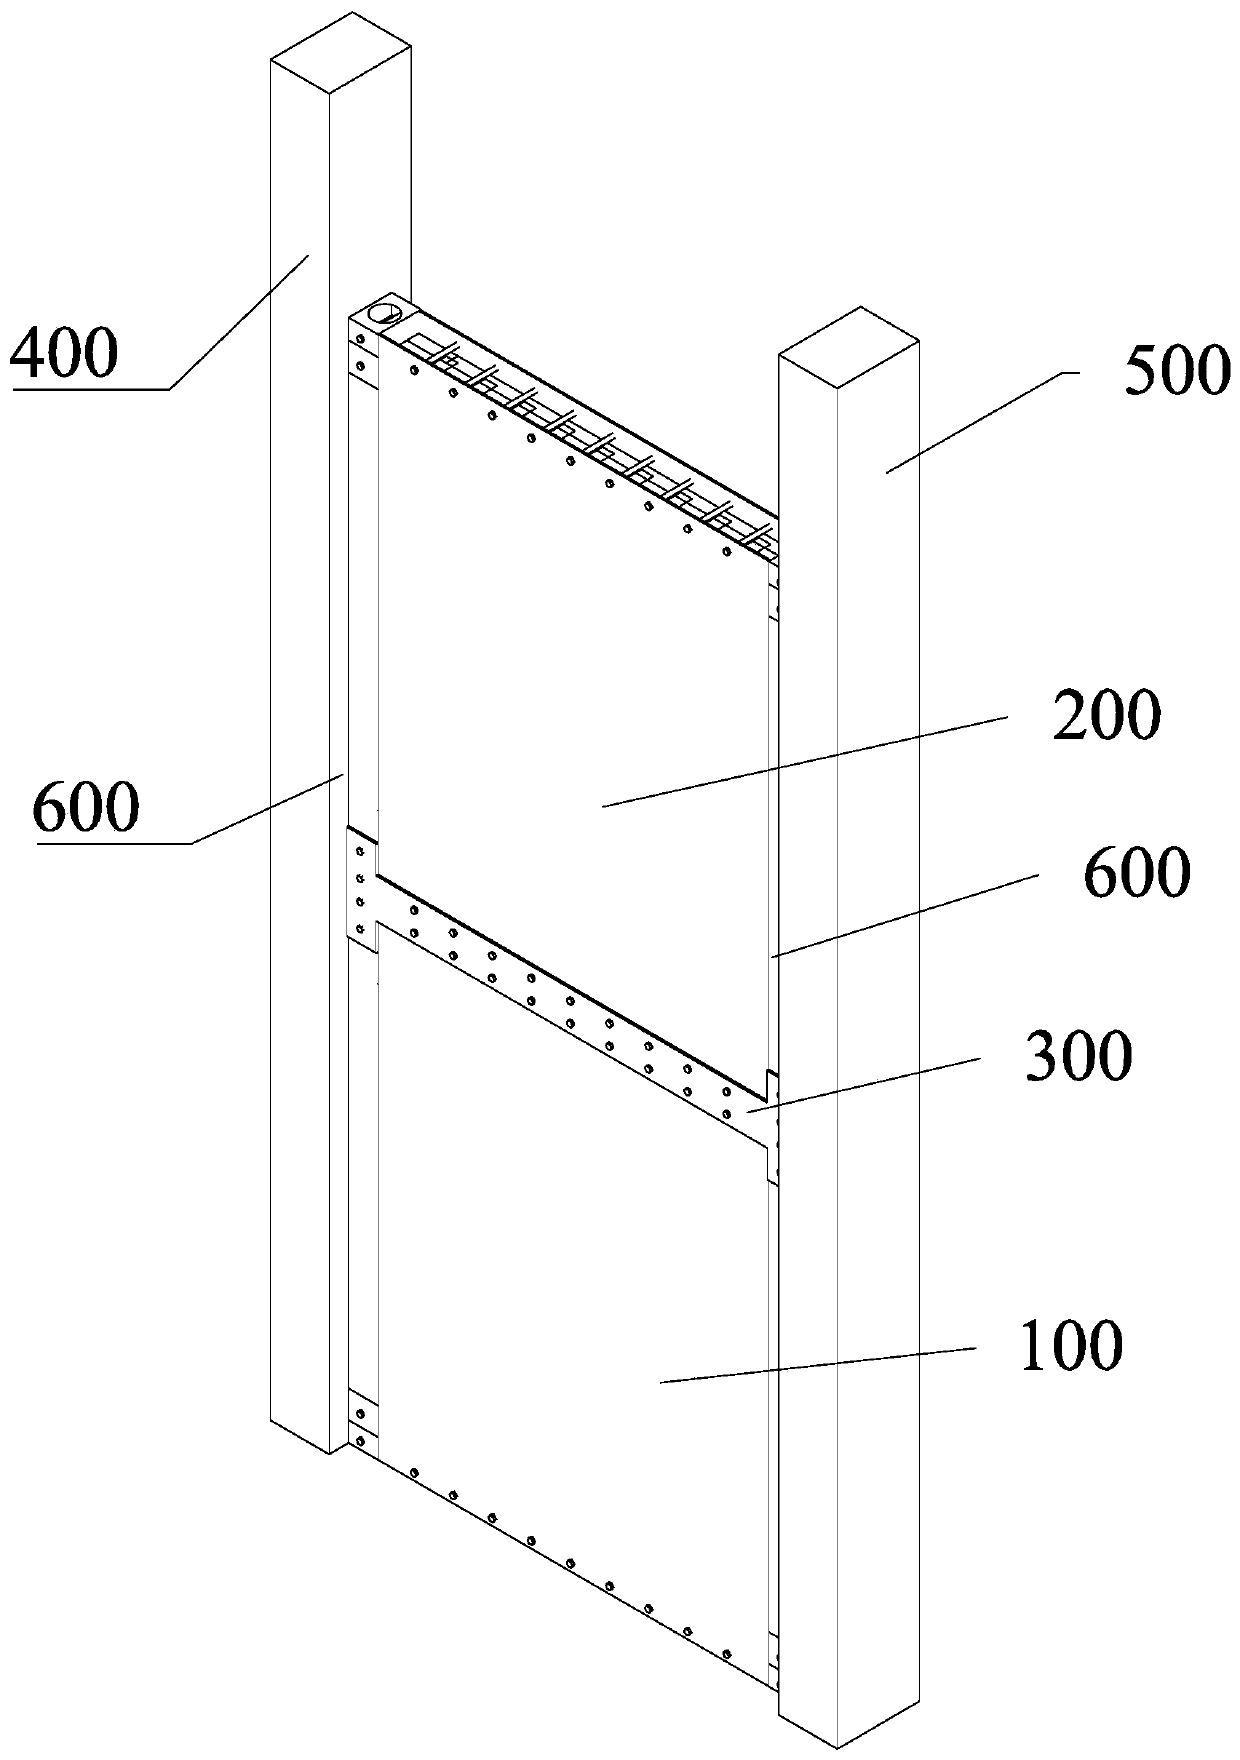 Fabricated shear wall with steel plate stud combined type diagonal bracing and construction method